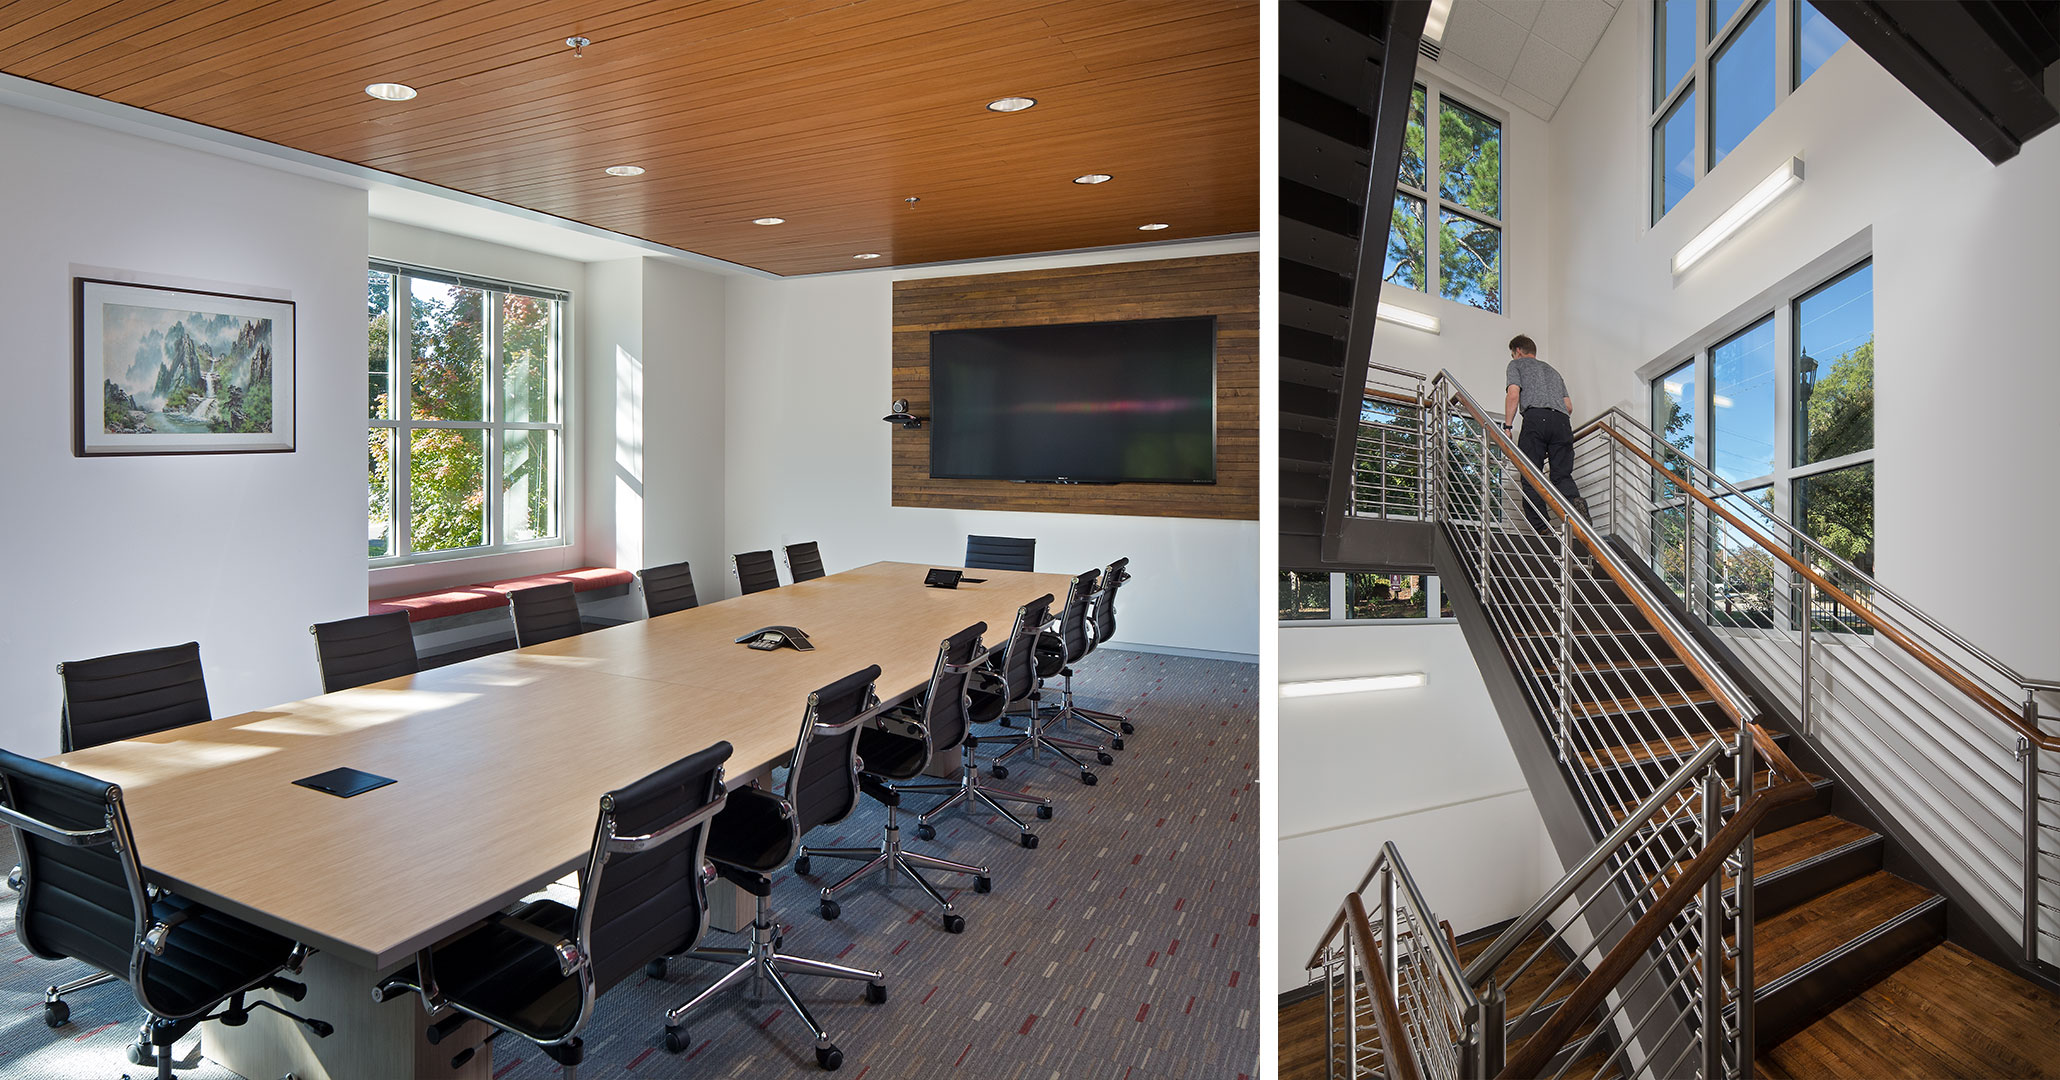 University of South Carolina worked with Boudreaux architects to design classrooms in the historic Hamilton College building.